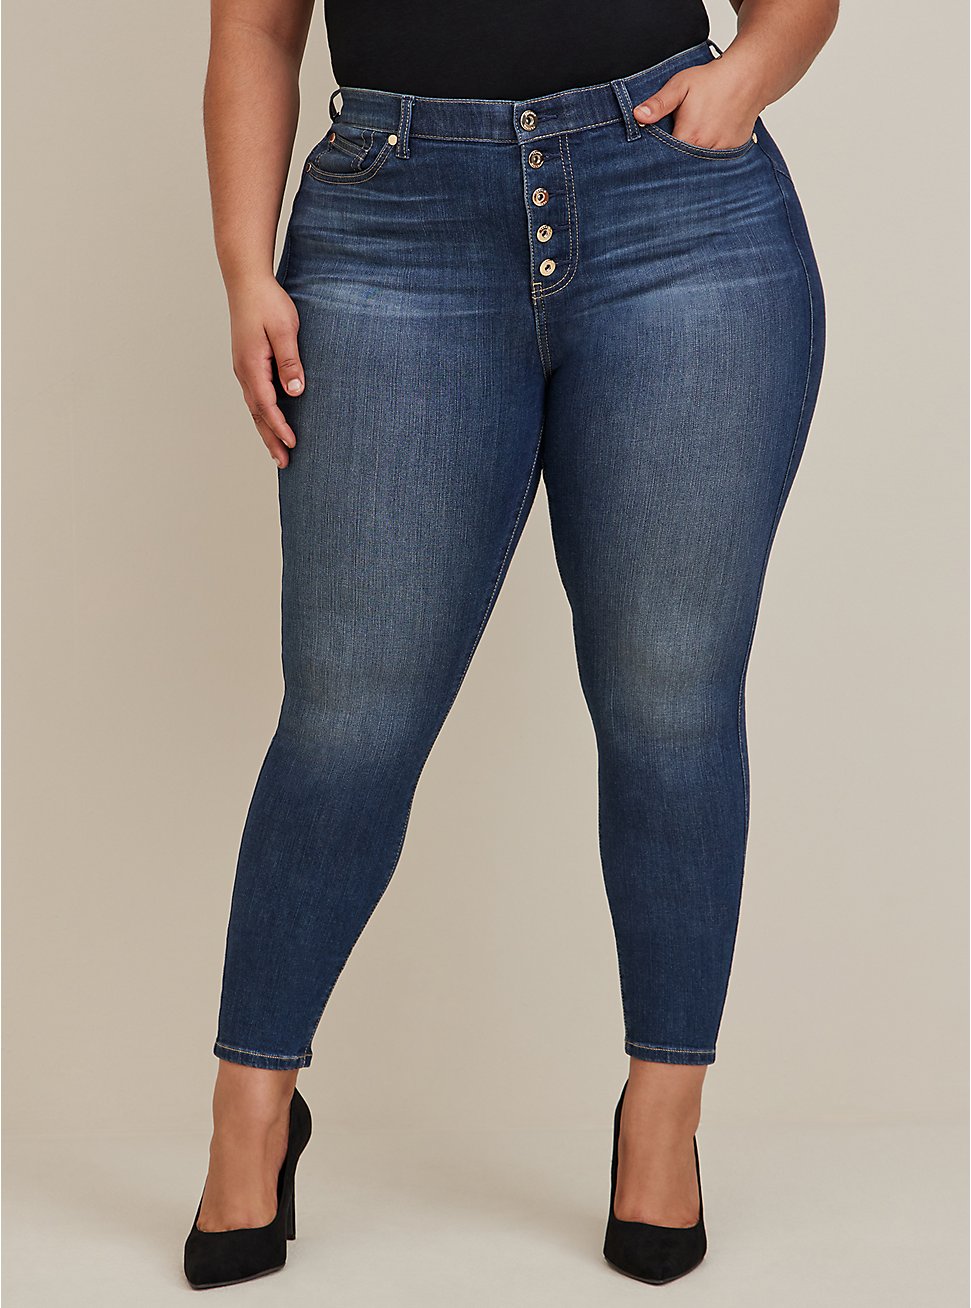 Plus Size Bombshell Skinny High-Rise Jean - Premium Stretch Button Fly, , hi-res